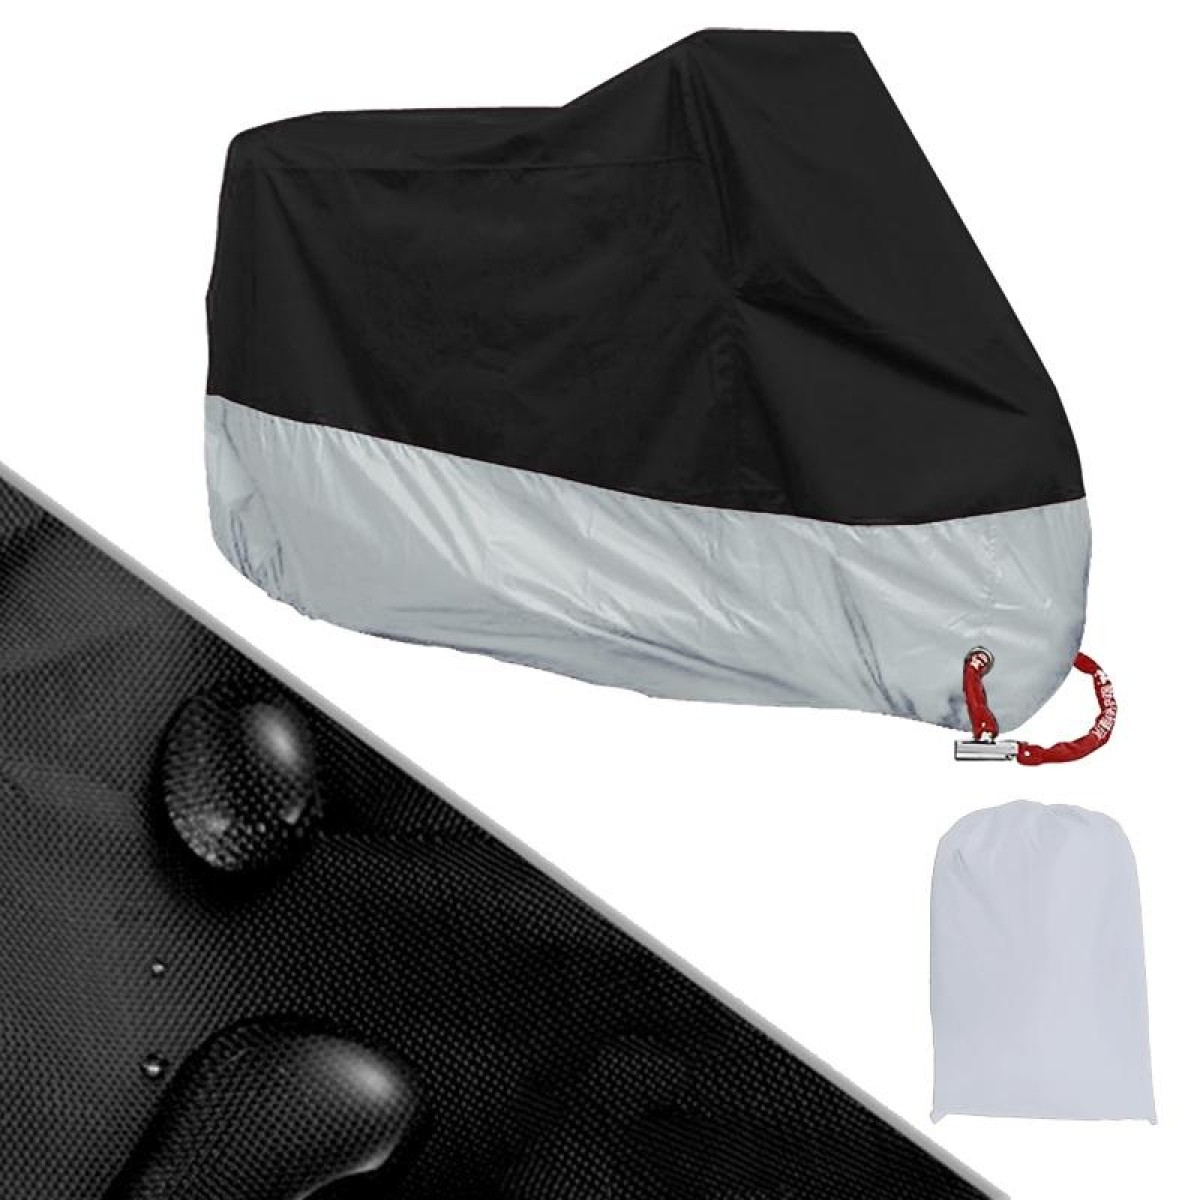 190T Motorcycle Rain Covers Dustproof Rain UV Resistant Dust Prevention Covers, Size: M(Black and Silver)